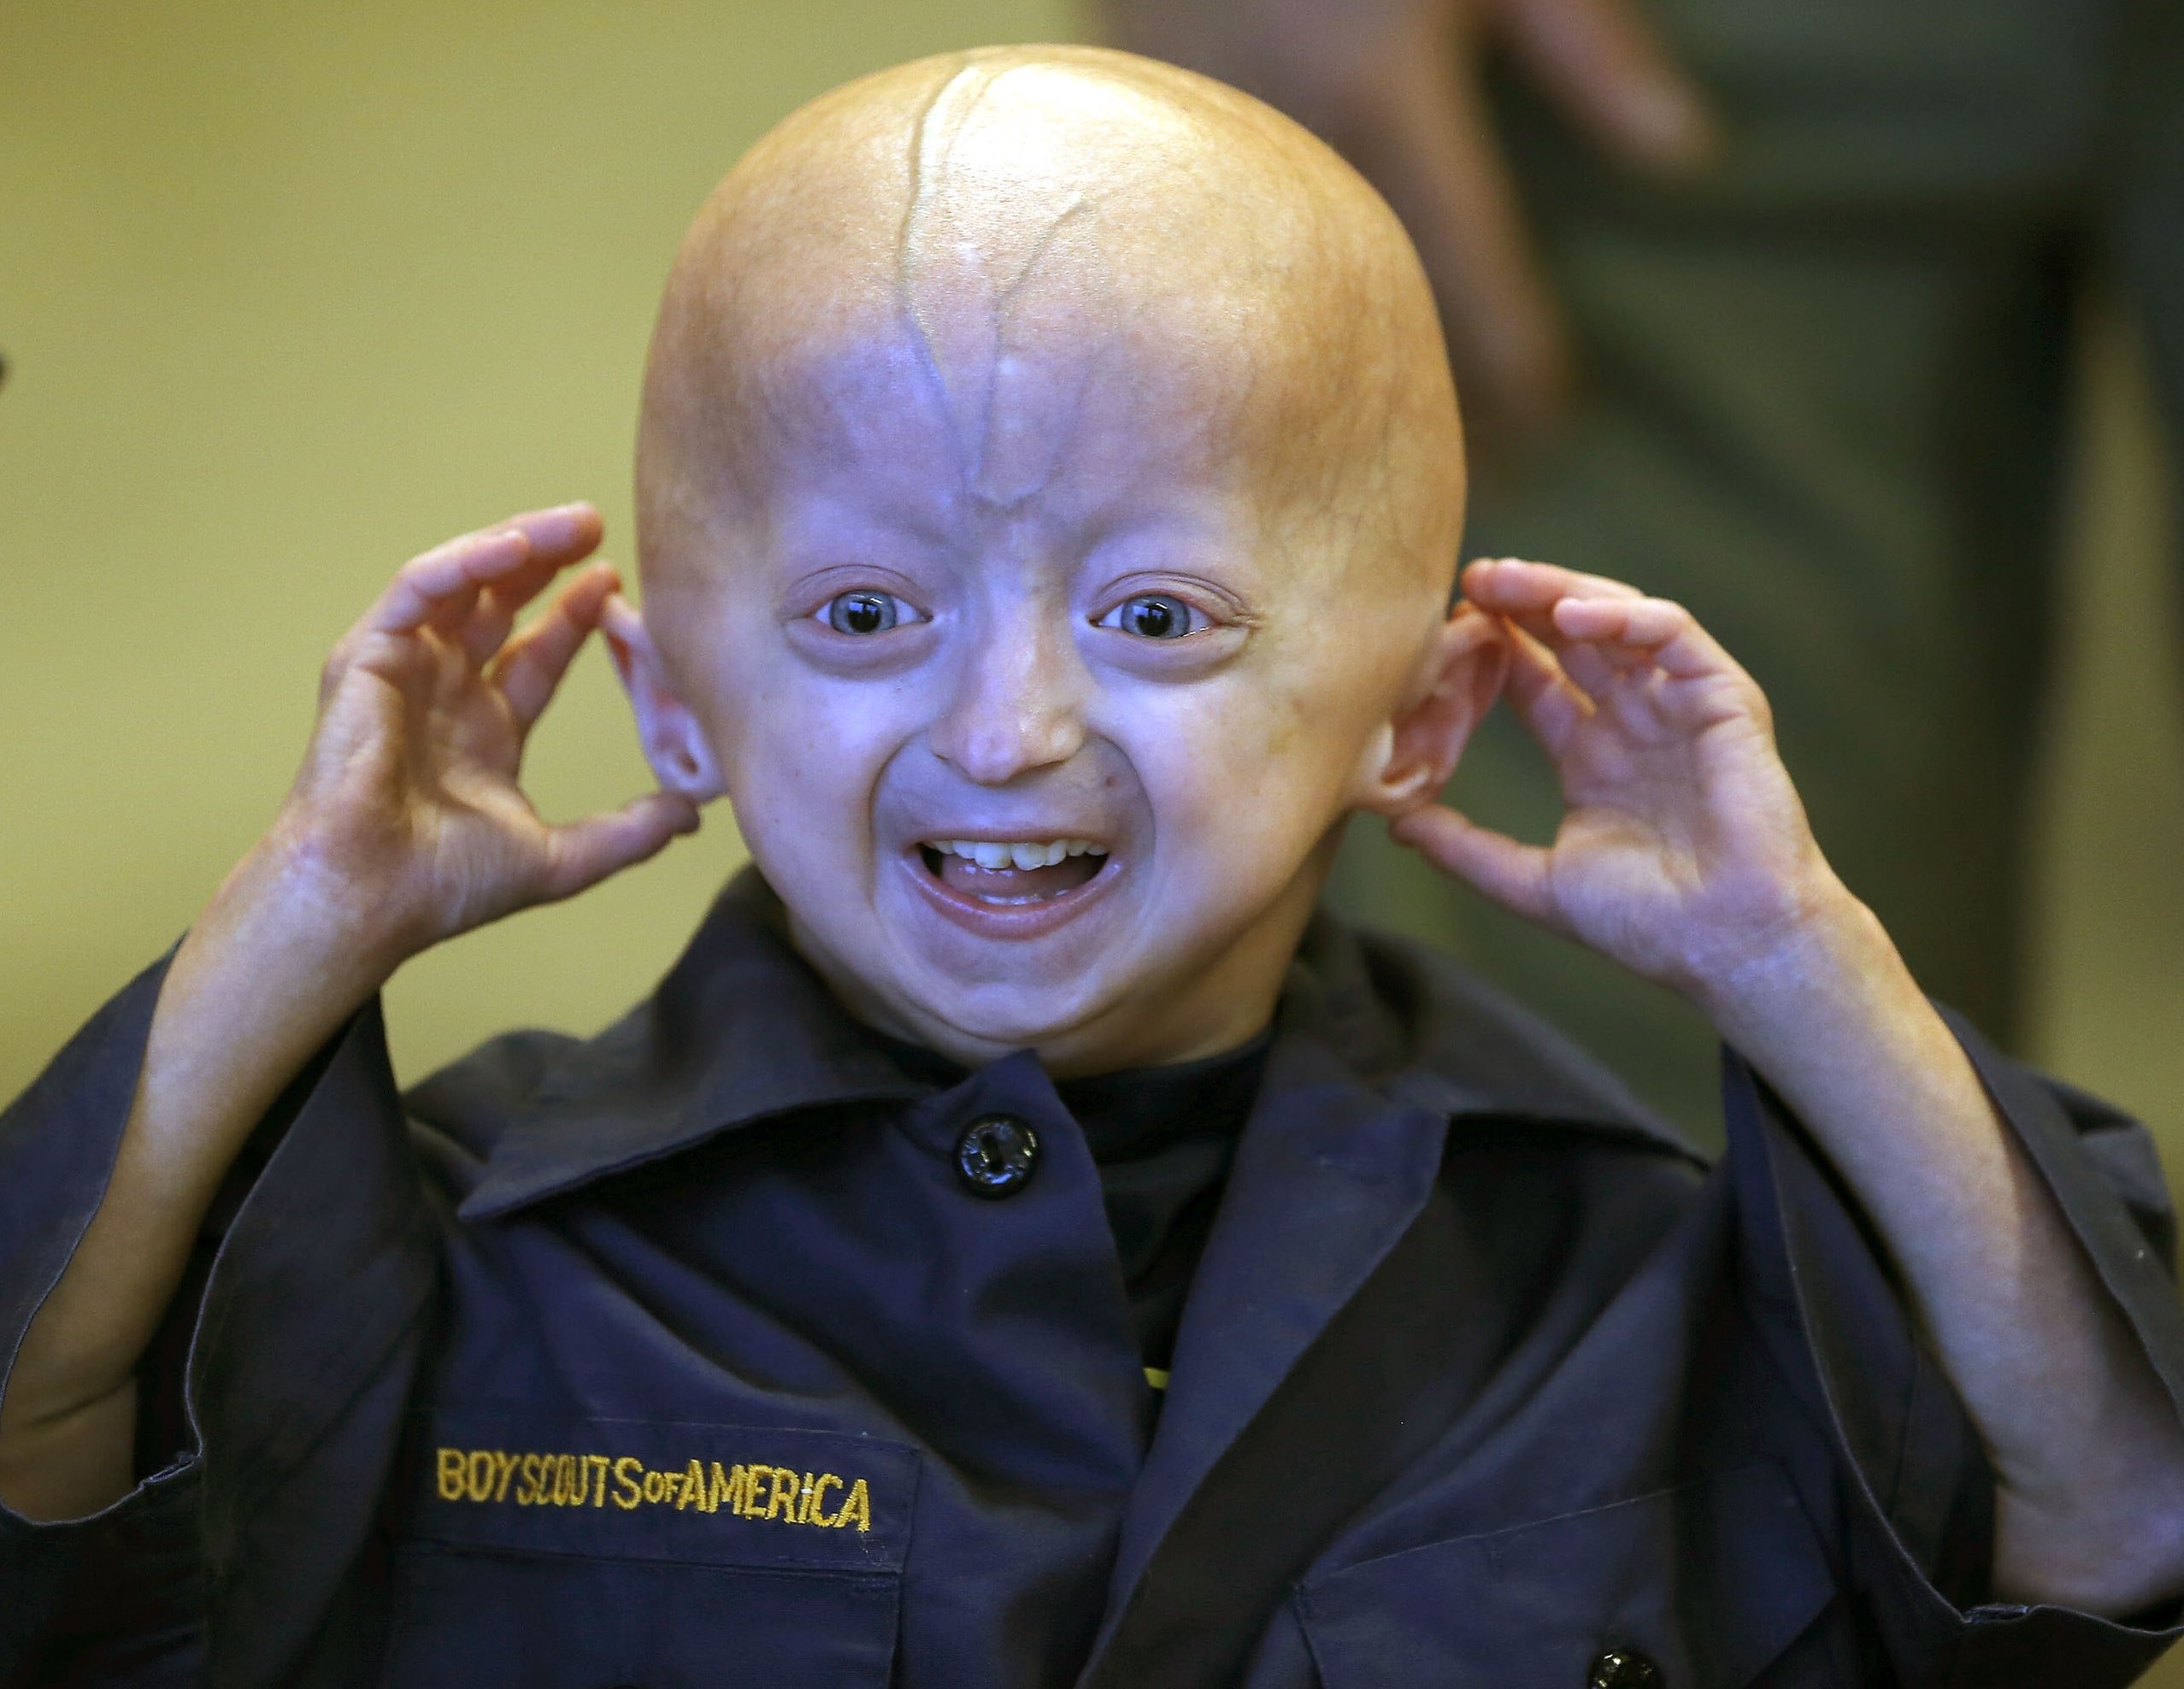 Zach, 6, is one of fewer than 250 people worldwide with the rapid-aging disease progeria | Photo credit: Charles Bertram